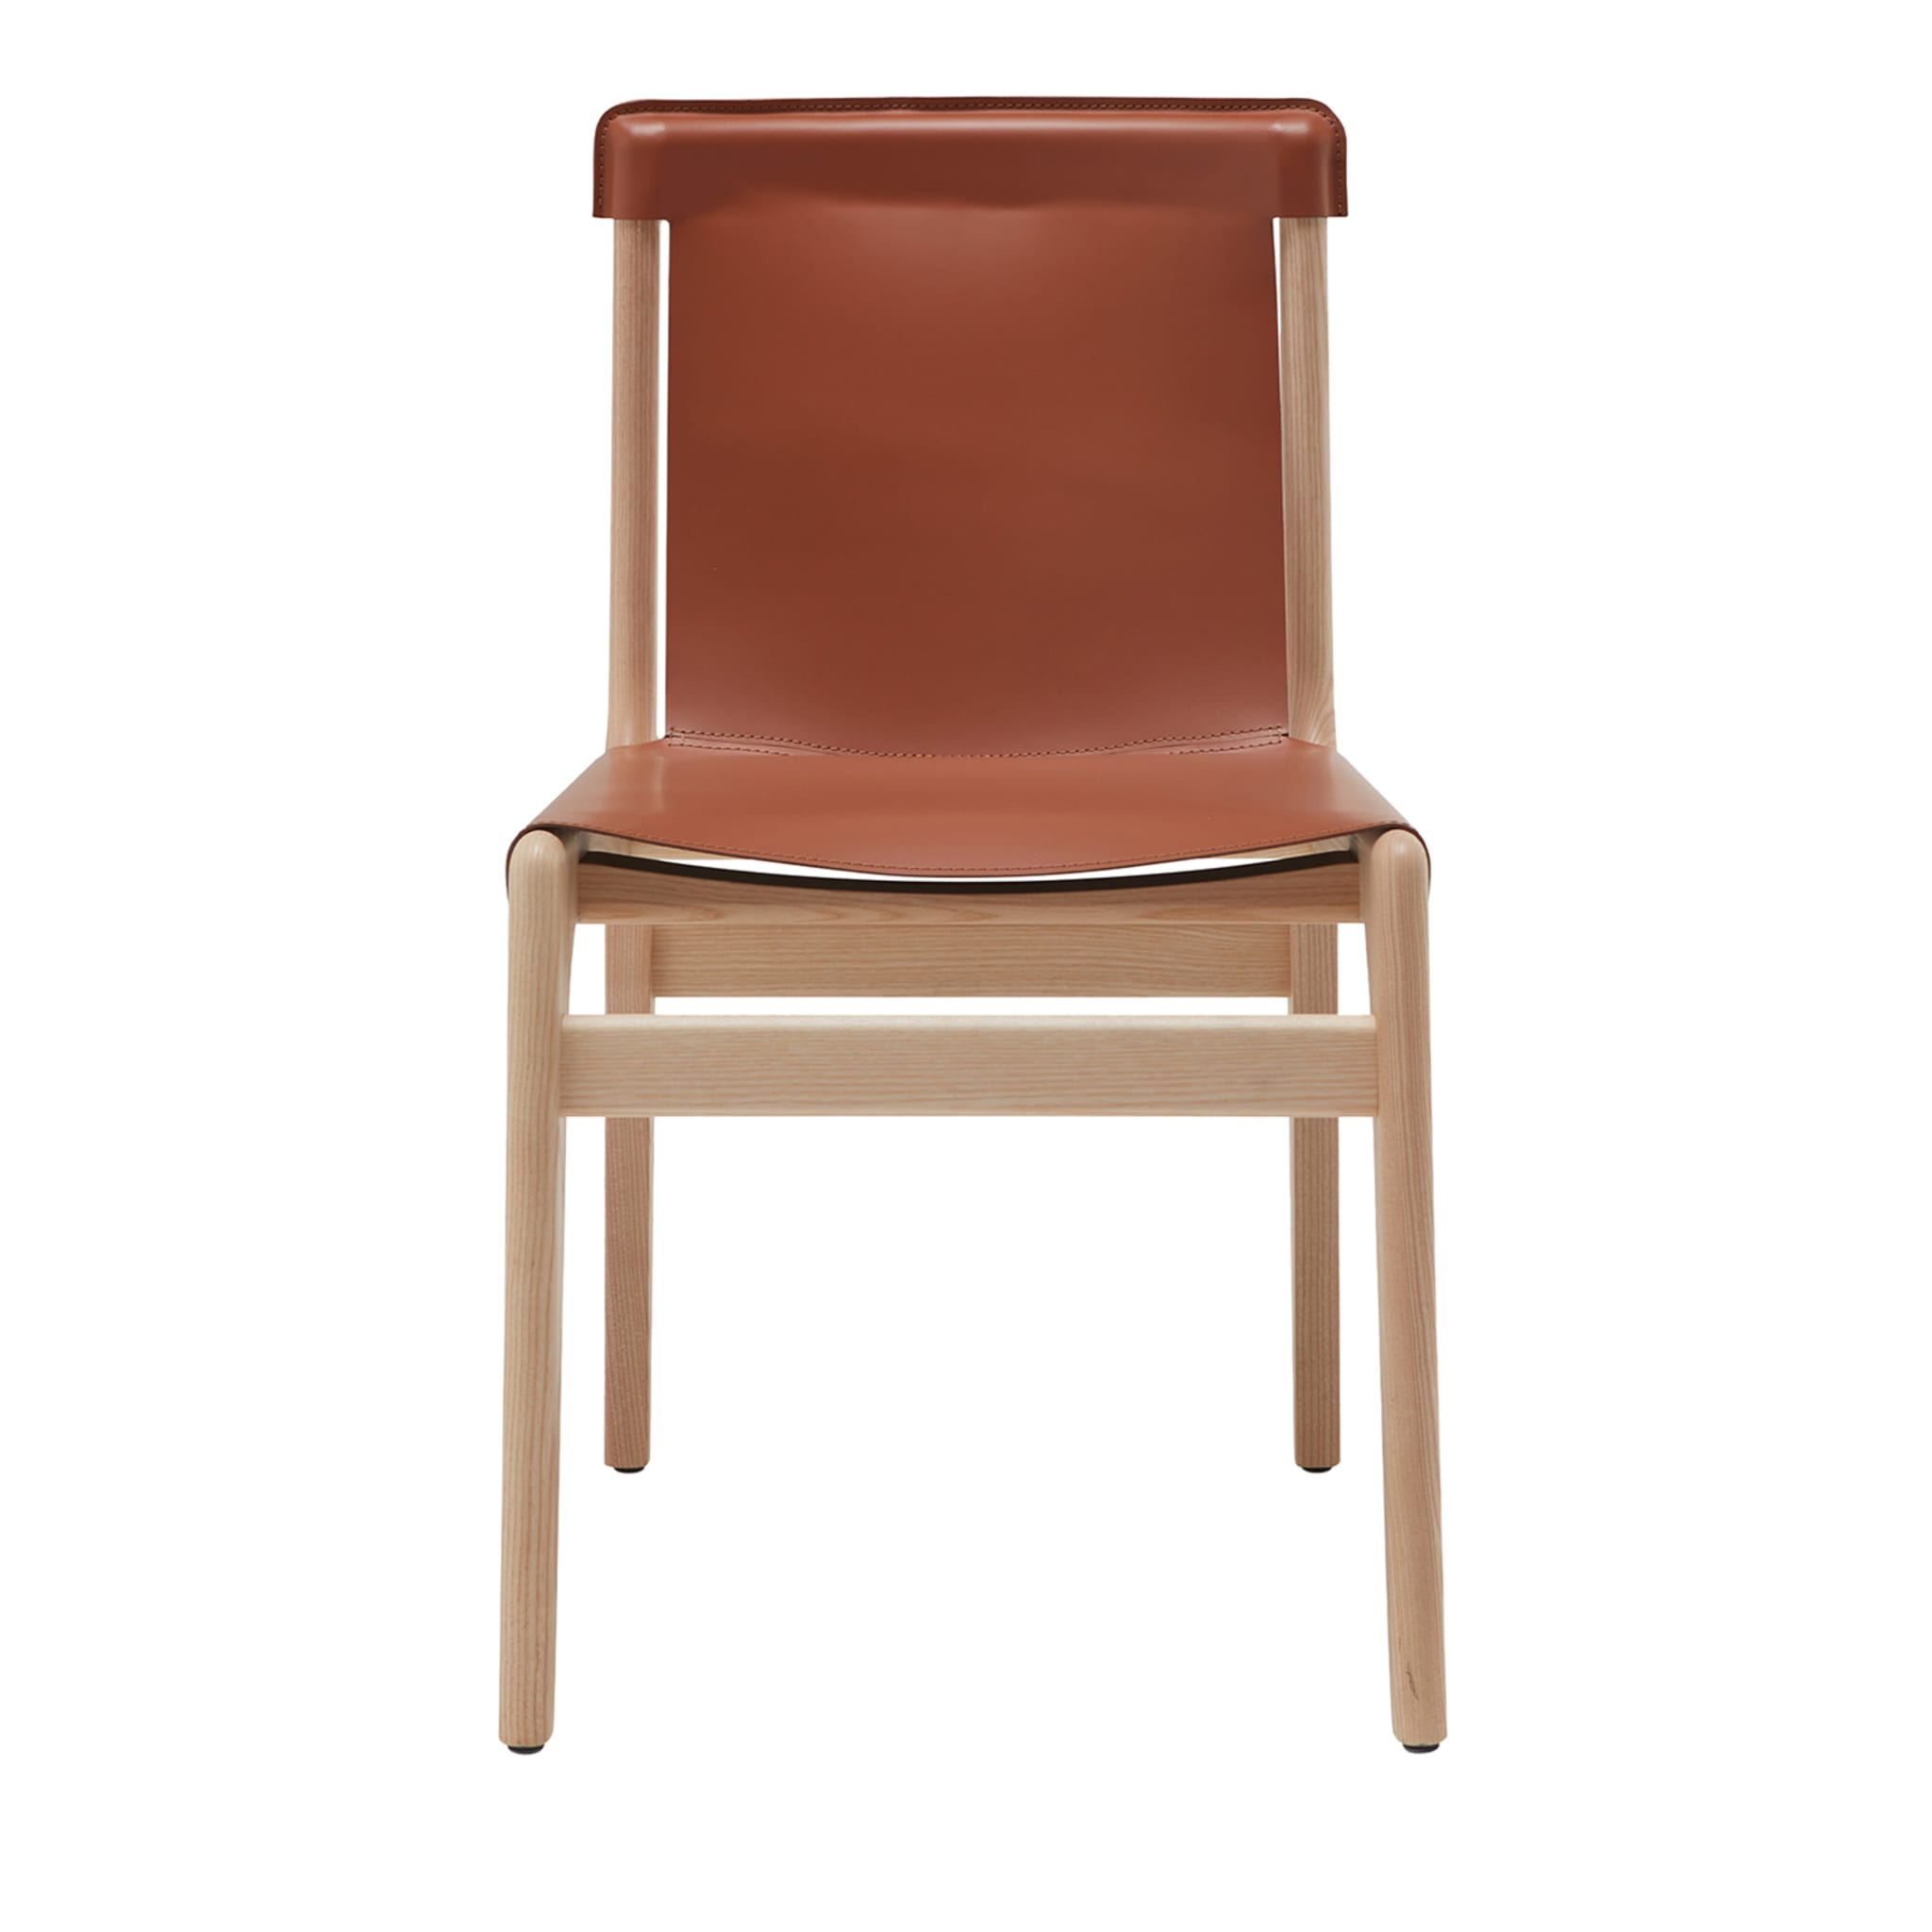 Burano Leather Chair by Balutto Associati - Main view